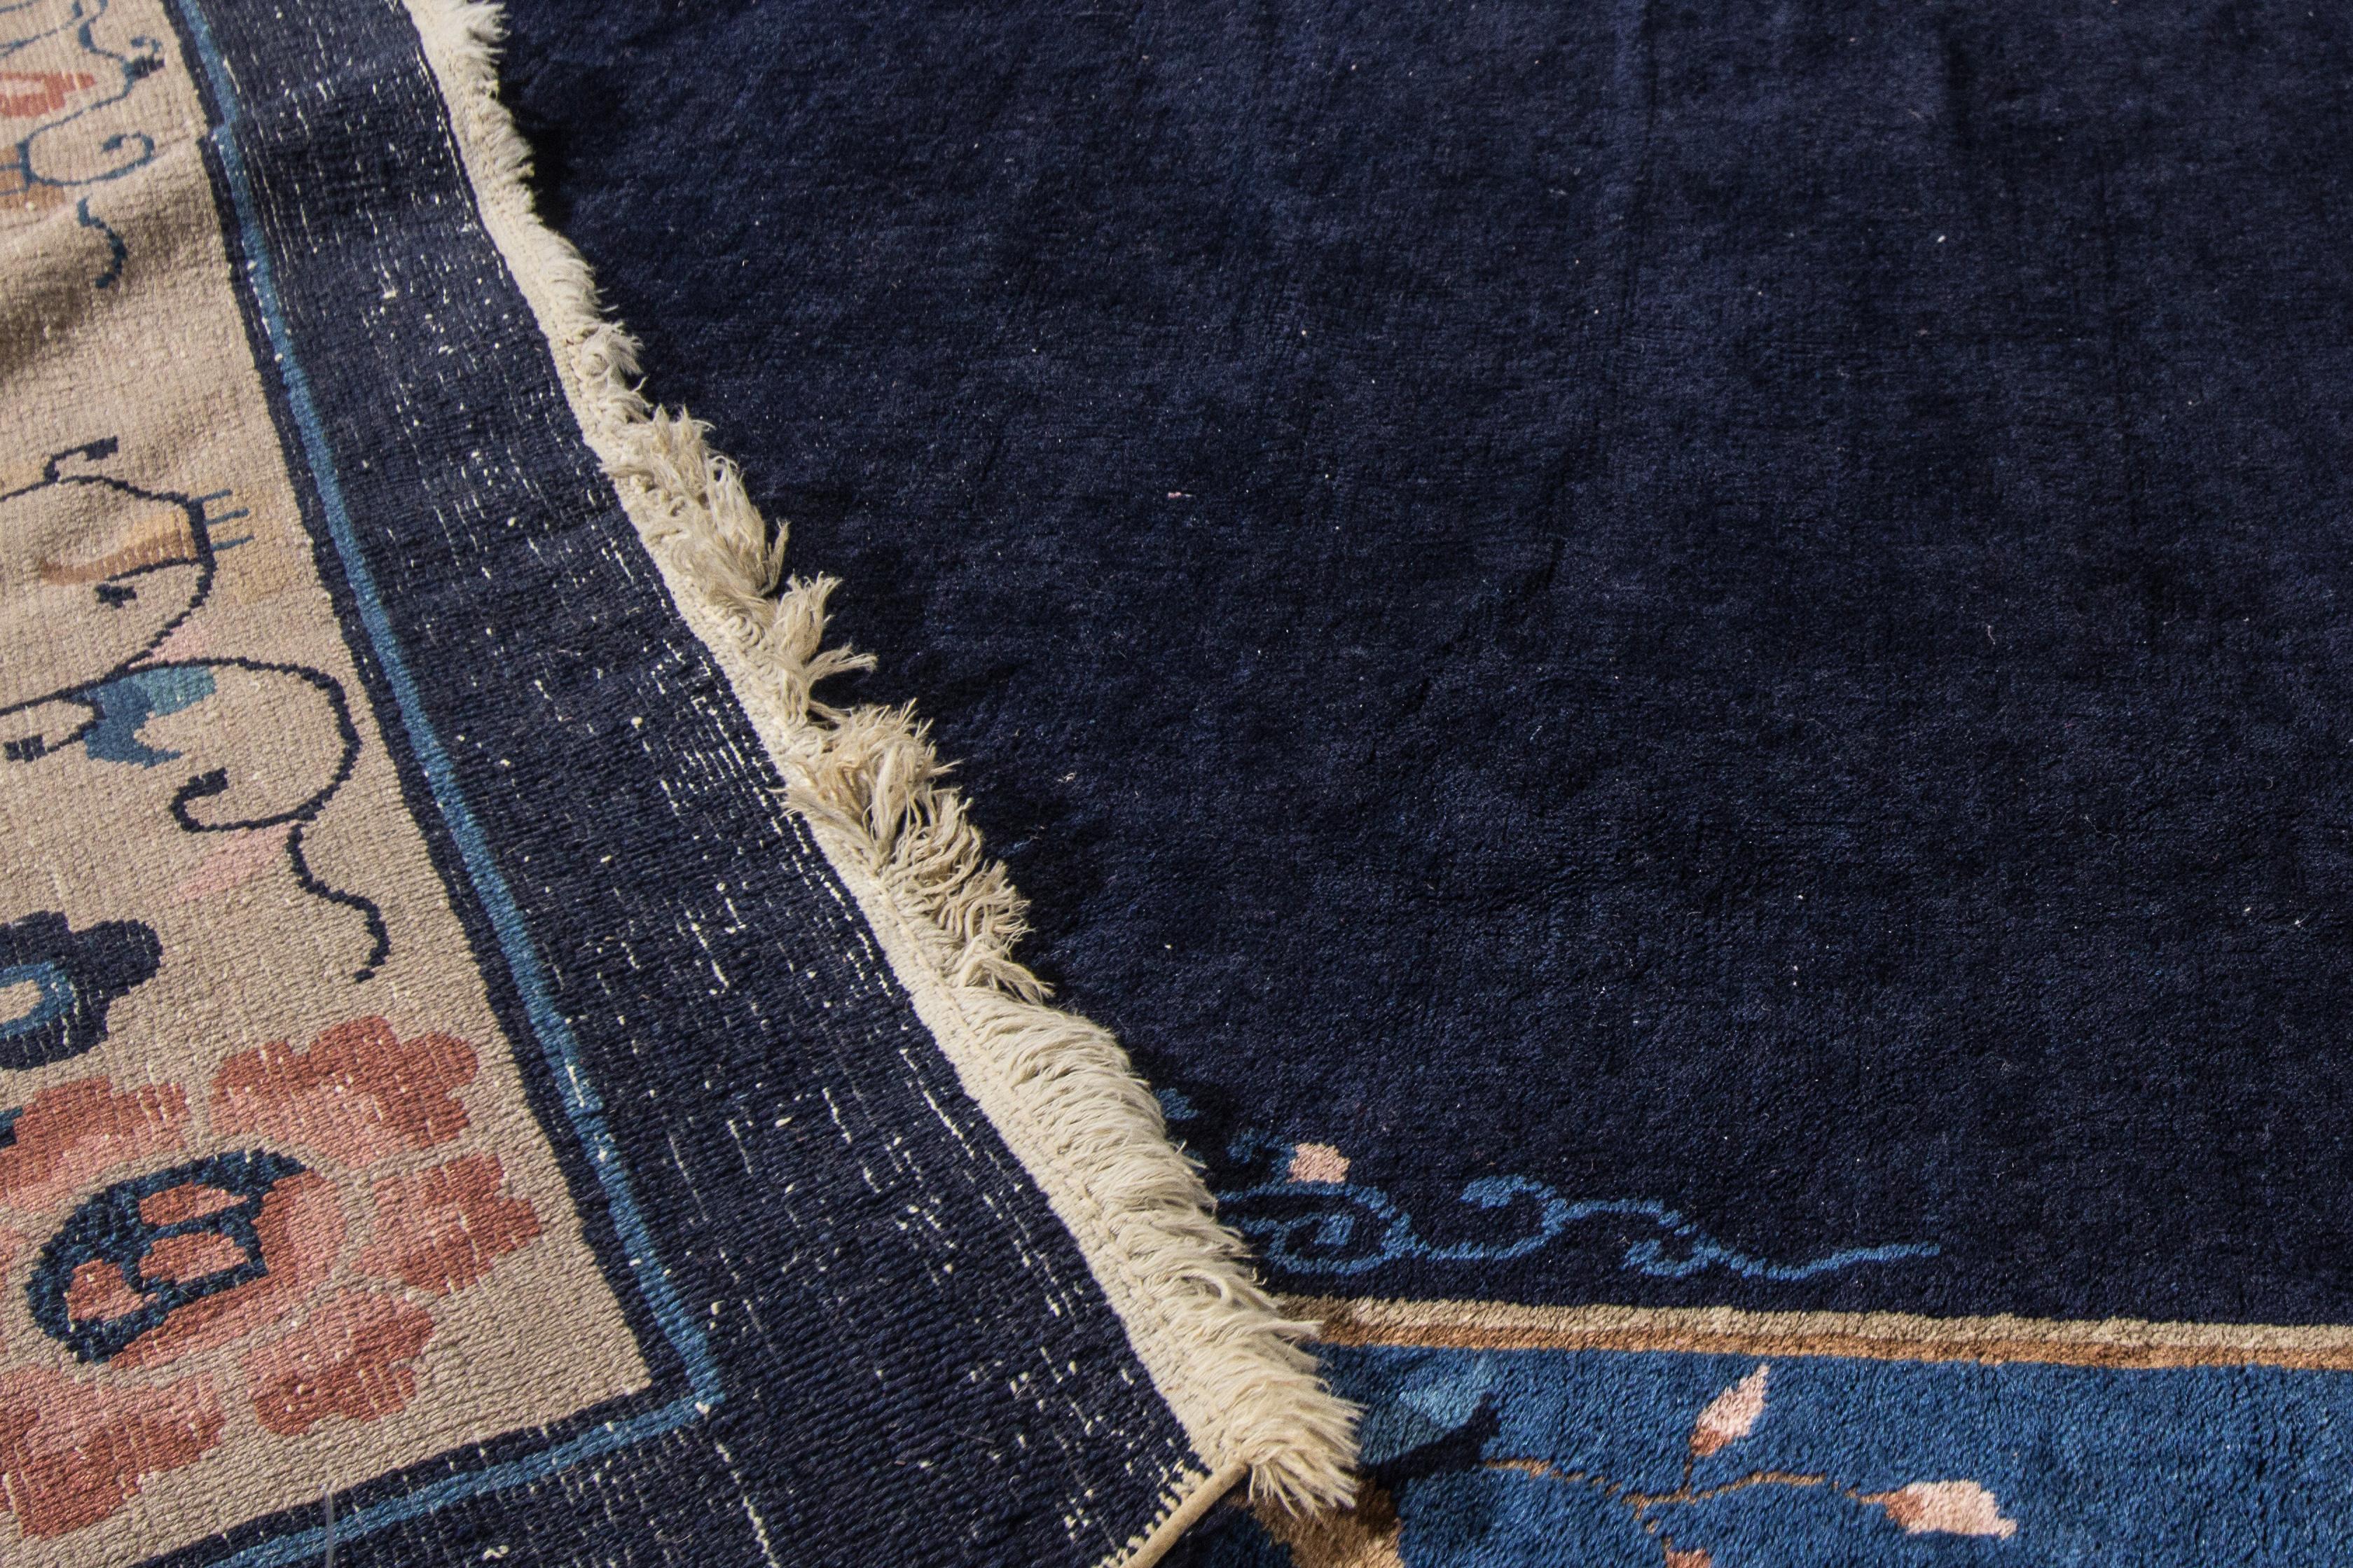 A beautiful oversize antique Chinese Art Deco hand knotted wool rug with a navy- blue field. This rug has a frame of beige and multi-color accents all over Chinese floral design.

This rug measures: 11'6